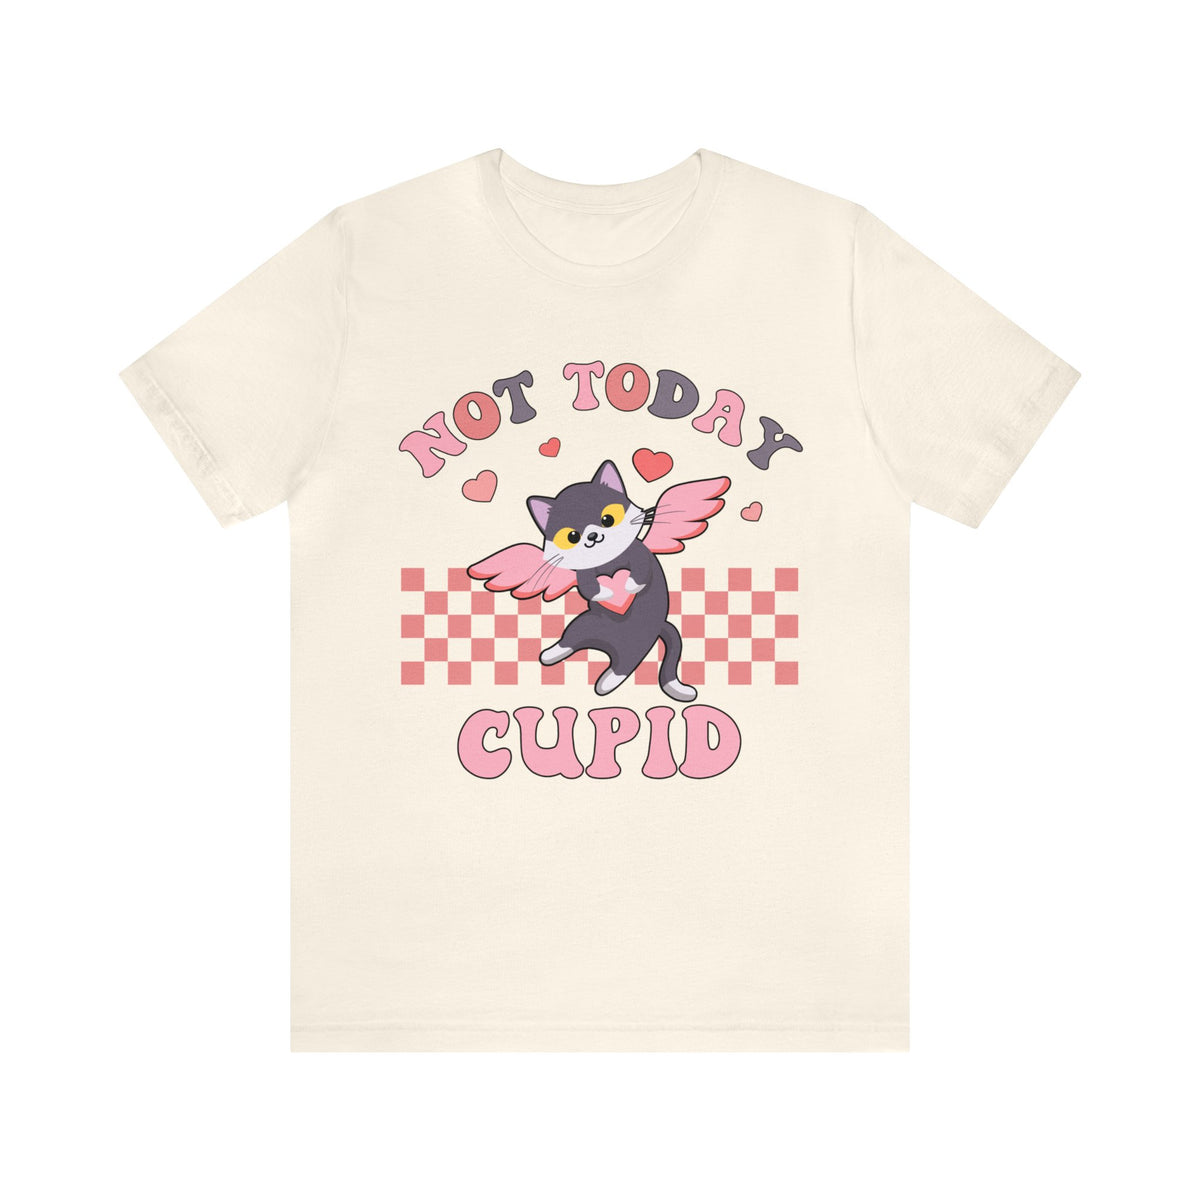 Not Today Cupid Galentines Day Shirt | Funny Valentines Day Gift | Unisex Jersey Short Sleeve Tee